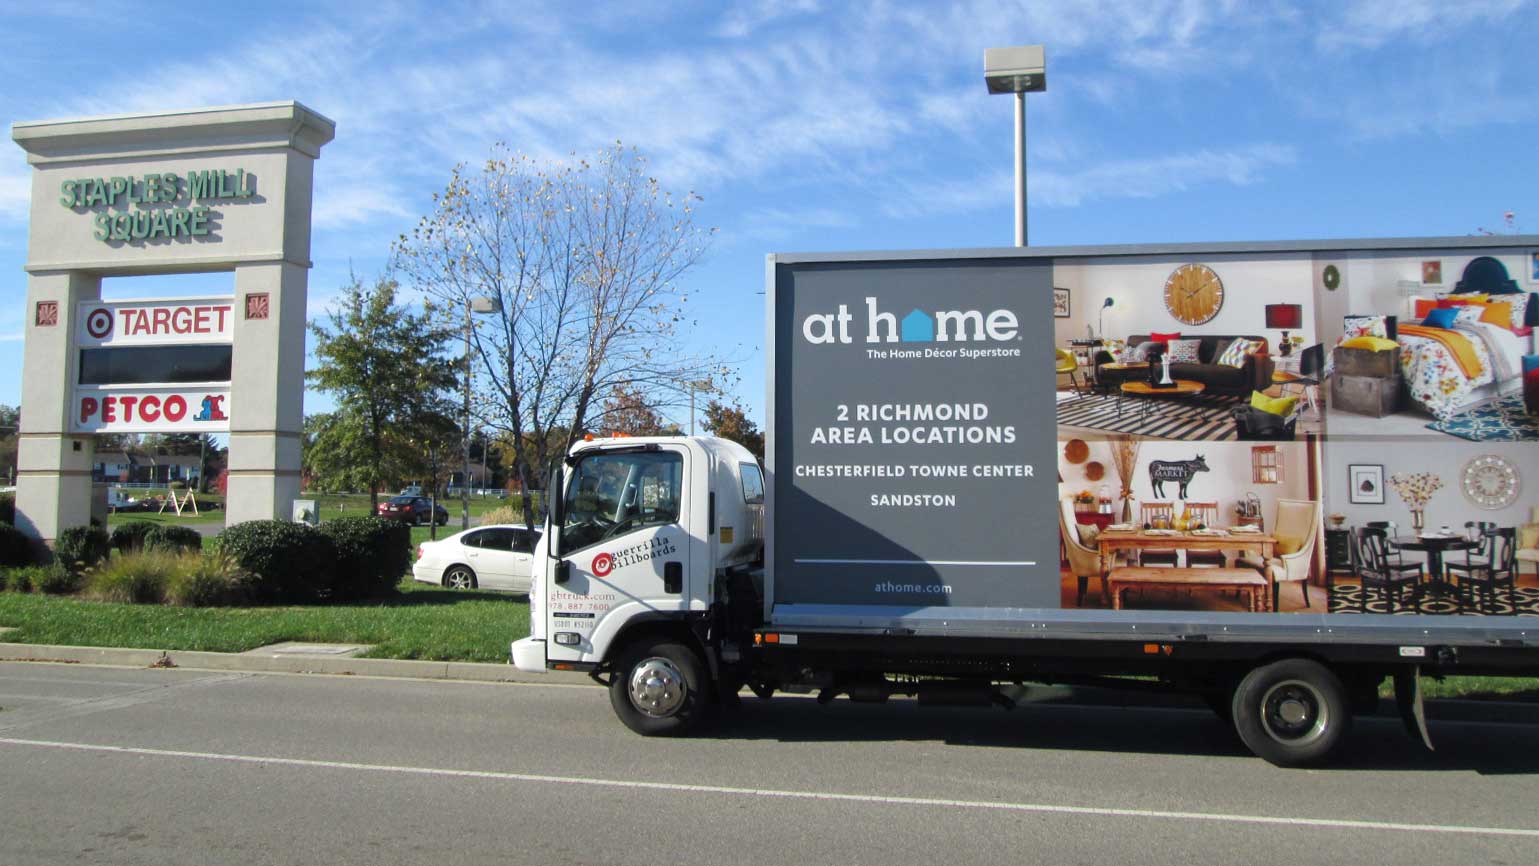 Billboard truck promoting At Home Furniture stores in Richmond VA.